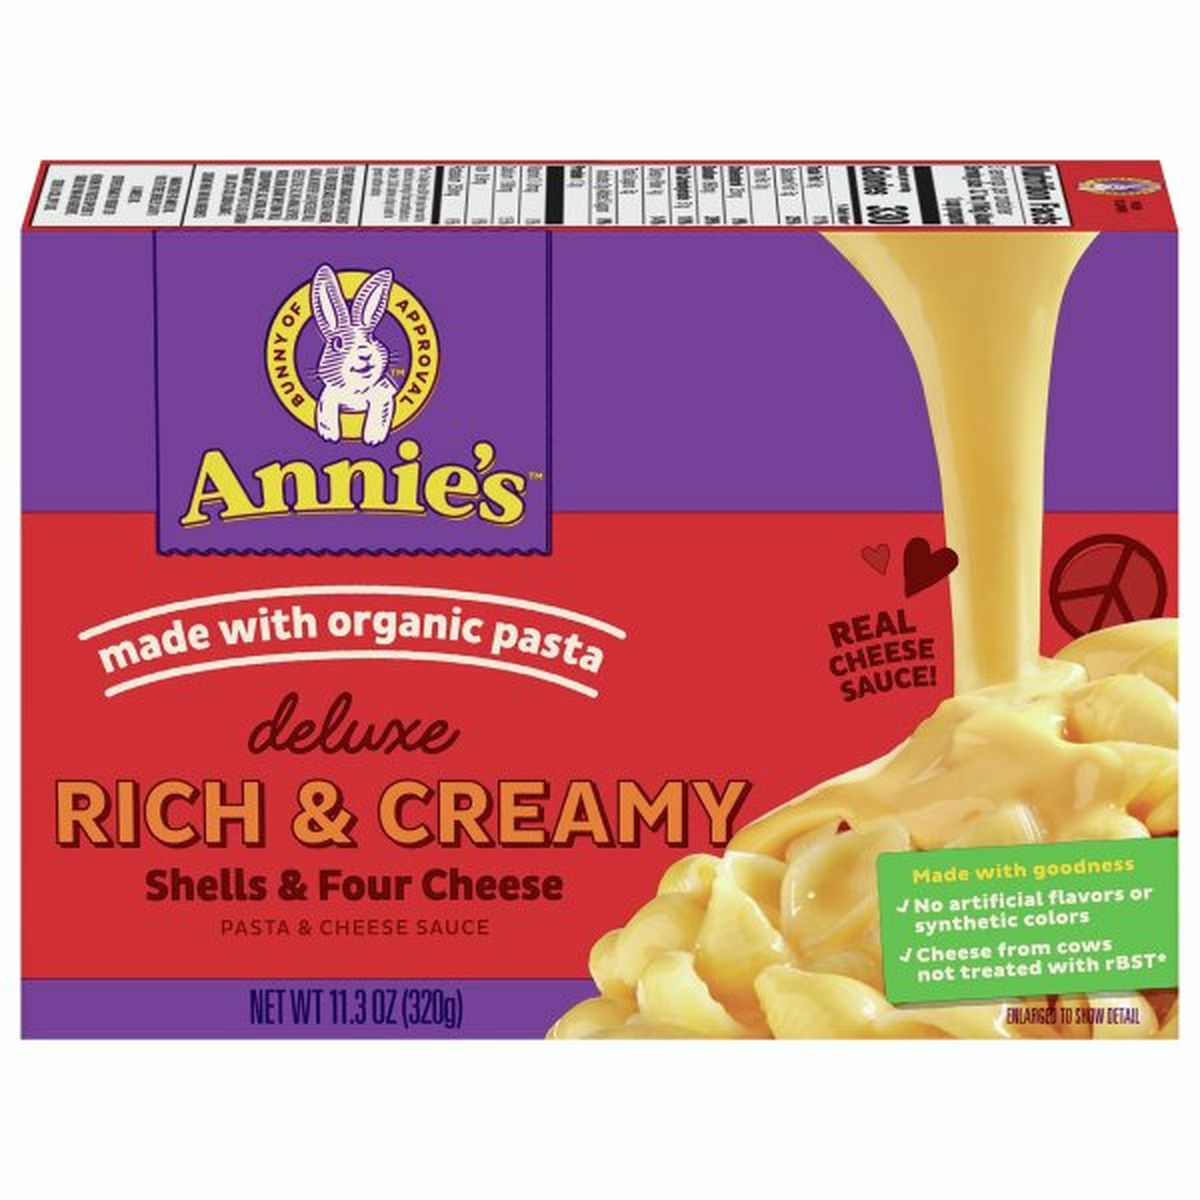 Calories in Annie's Pasta & Cheese Sauce, Shells & Four Cheese, Rich & Creamy, Deluxe